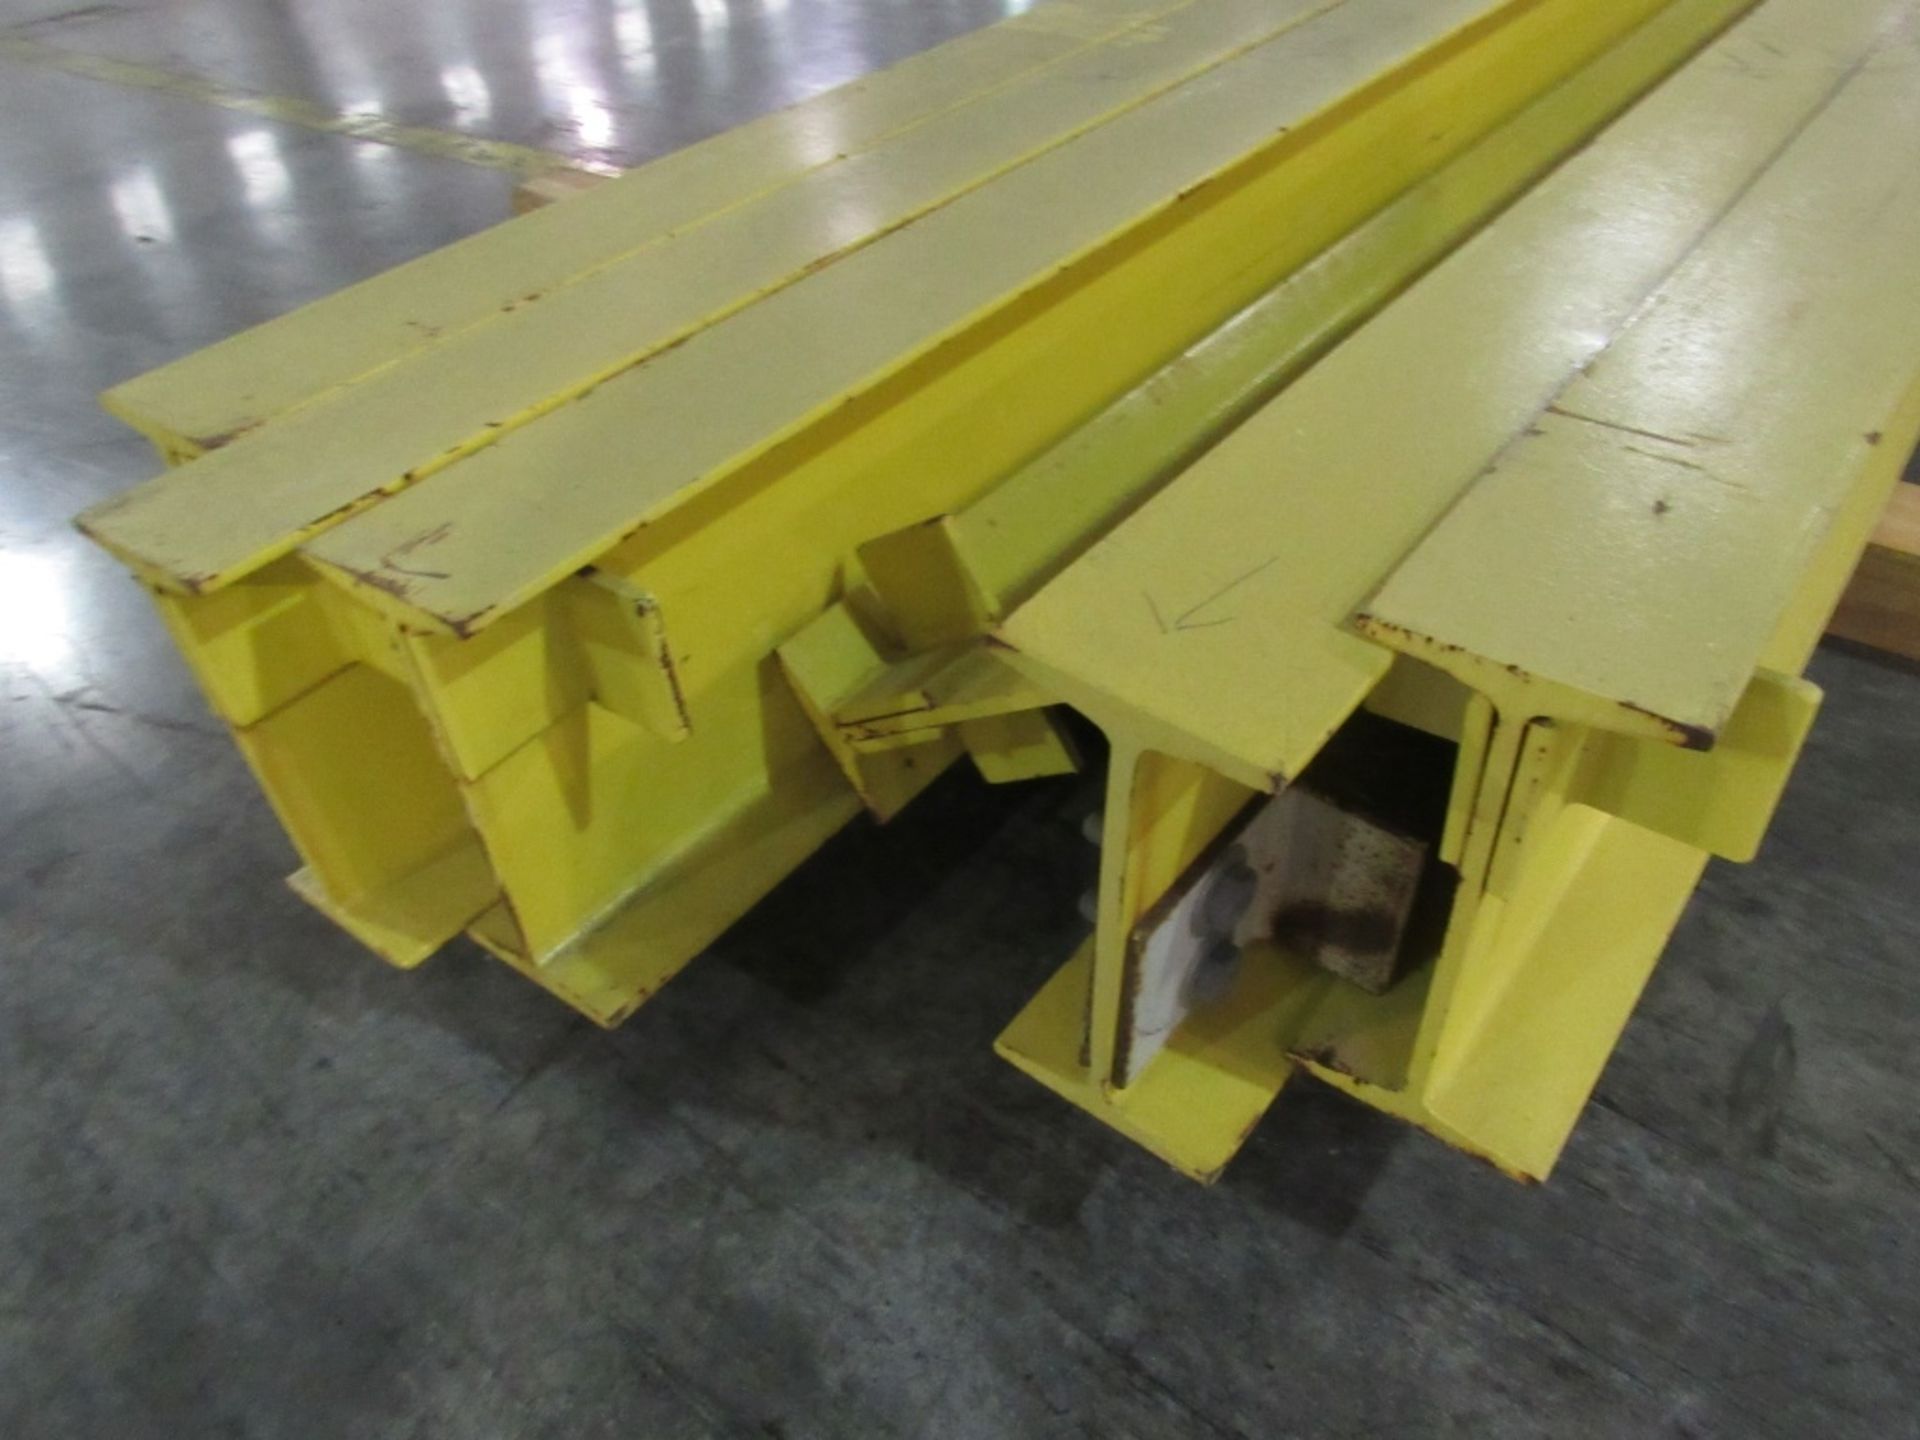 Overhead Crane Parts- ***Located in Cleveland, TN*** MFR - Tragfahigkeit (6) Beams/ Supports 25' x - Image 9 of 10